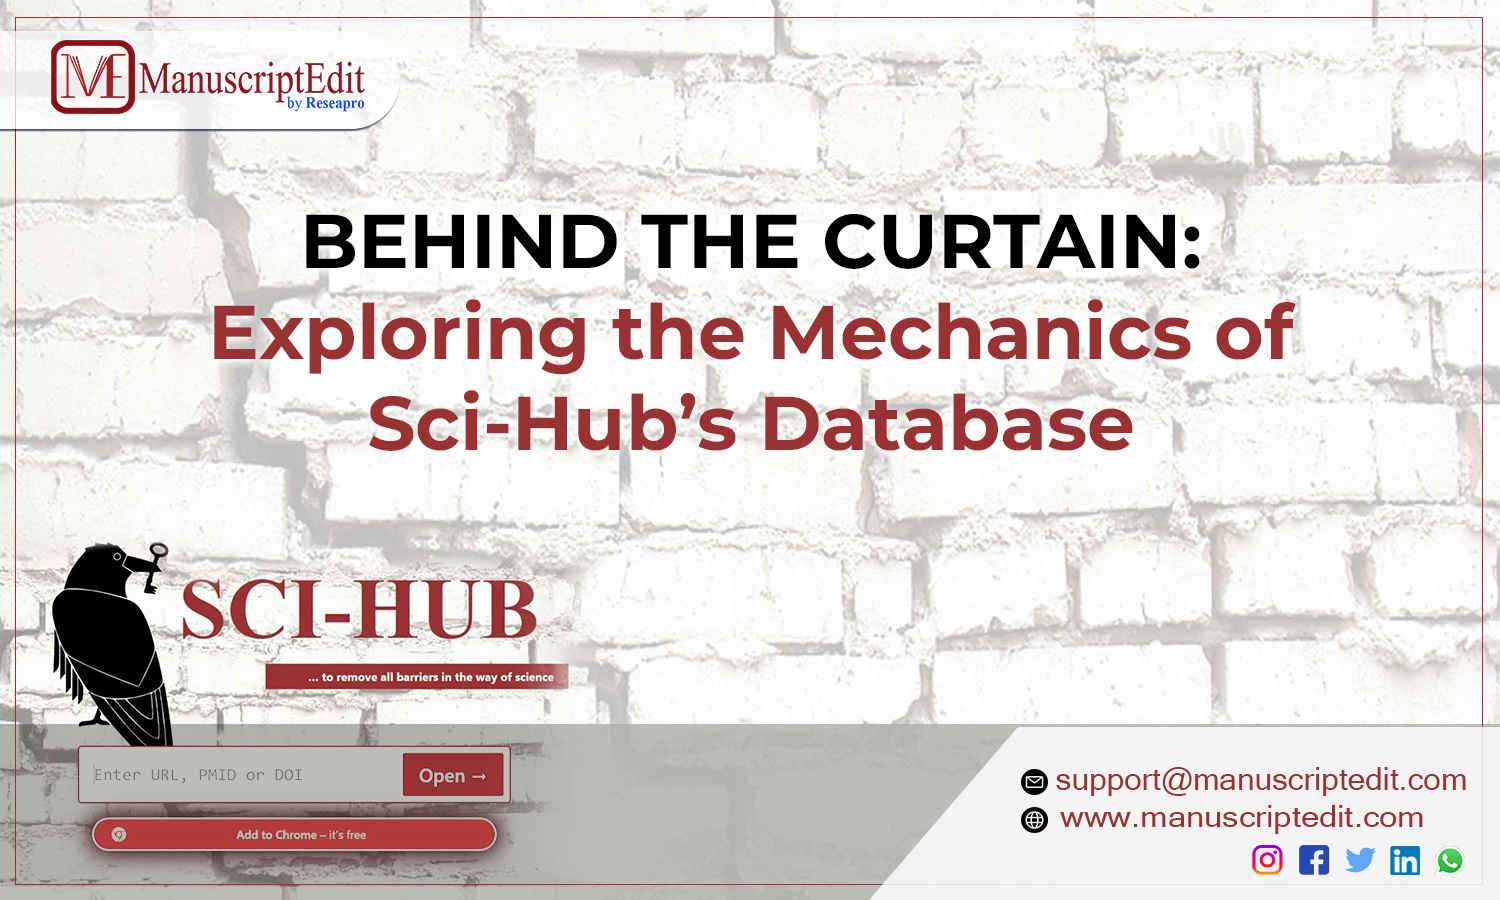 Behind the Curtain: Exploring the Mechanics of Sci-Hub’s Database